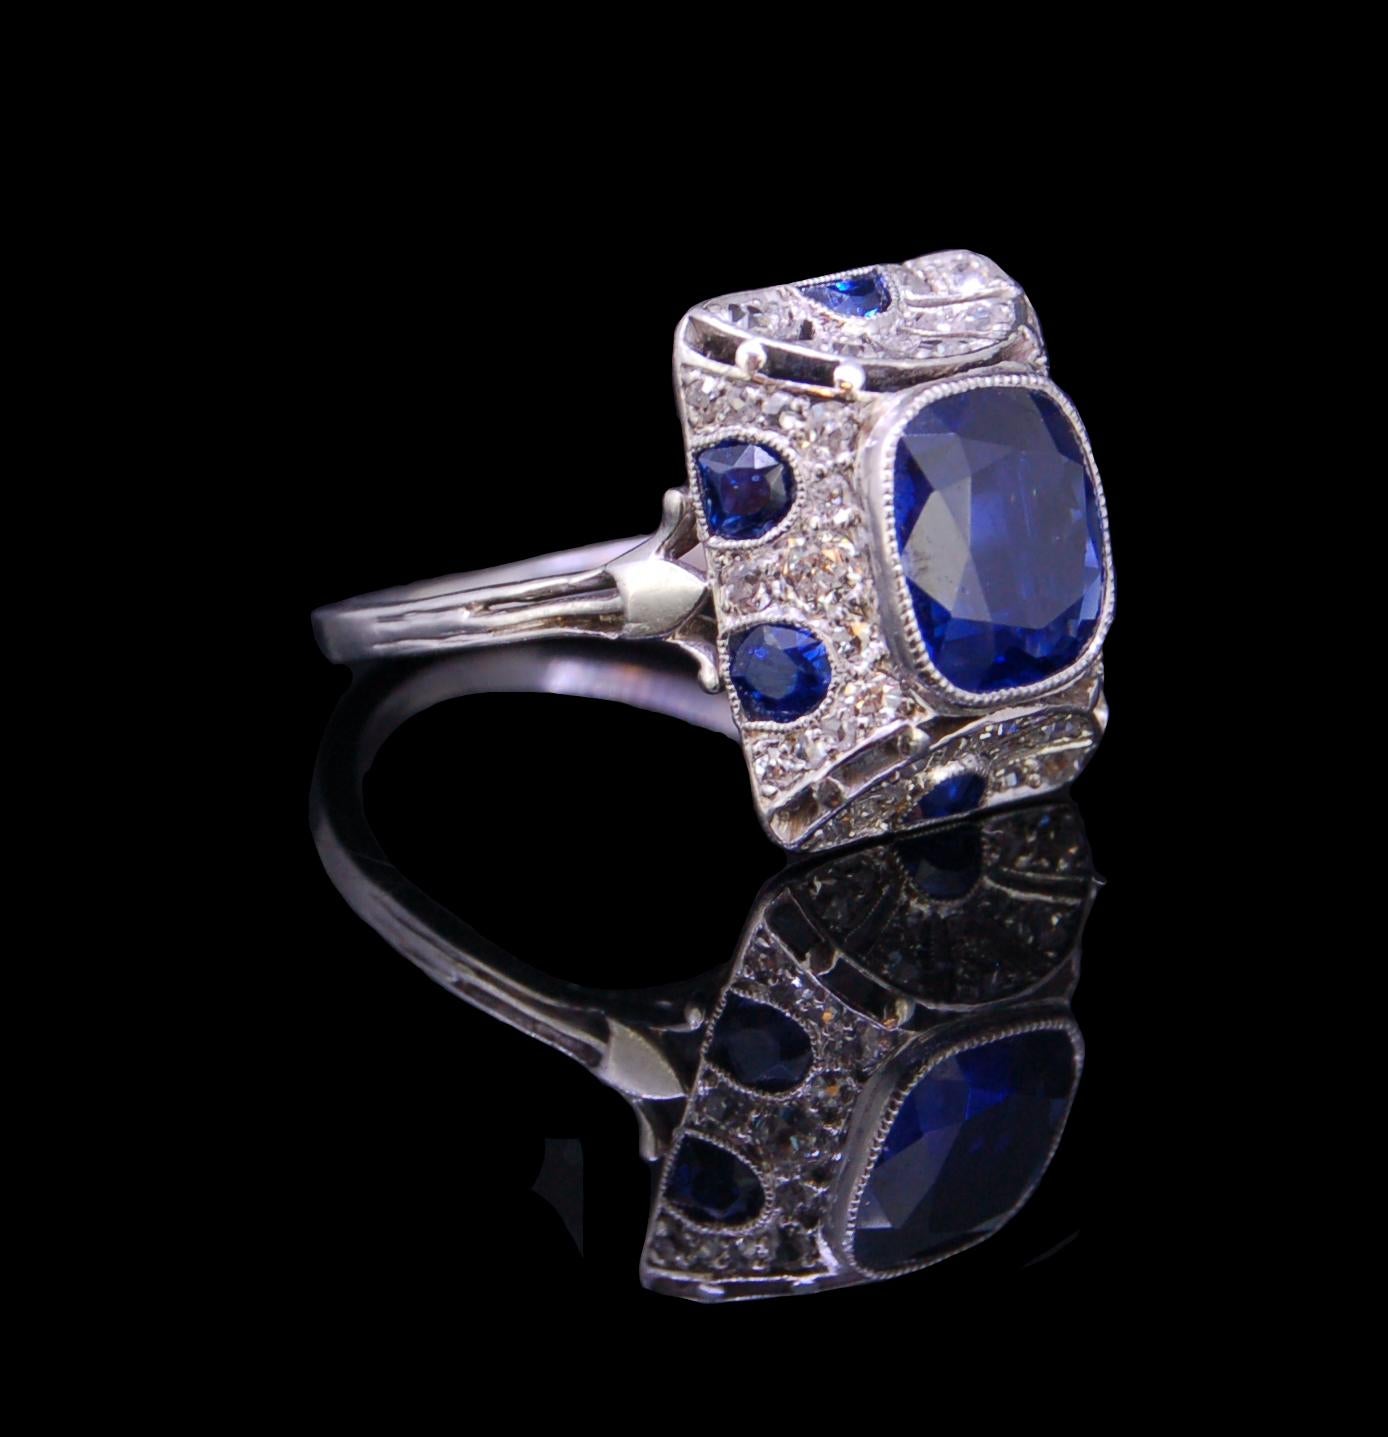 ART-DECO STYLE 2.83 ct. BURMA BLUE SAPPHIRE AND DIAMOND PLATINUM RING, set with a cushion cut sapphire of 2.83 ct. in a bevelled and concave rectangular surround set with round cut diamonds and fancy cut sapphires. French assay marks. Size M. 5.7